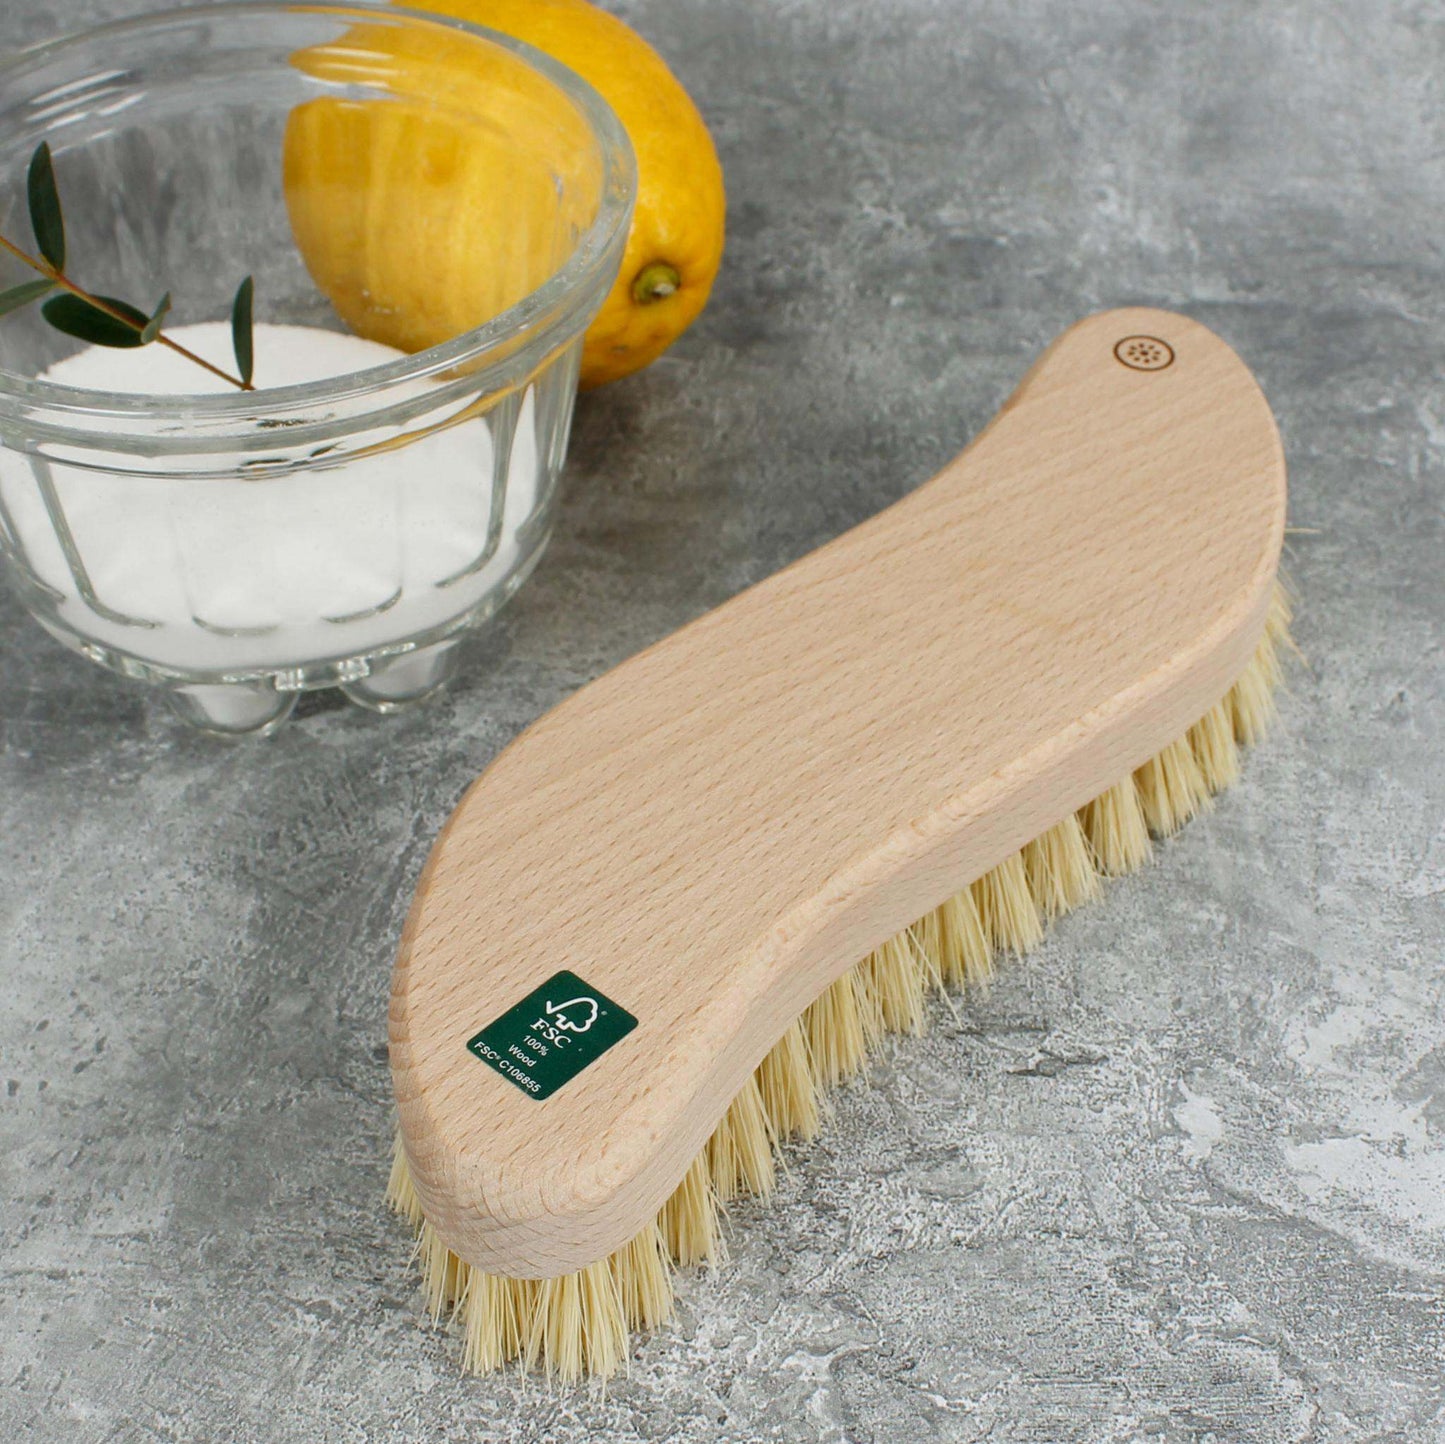 A Slice of Green Brushes Wooden Scrubbing Brush with Natural Tampico Bristles